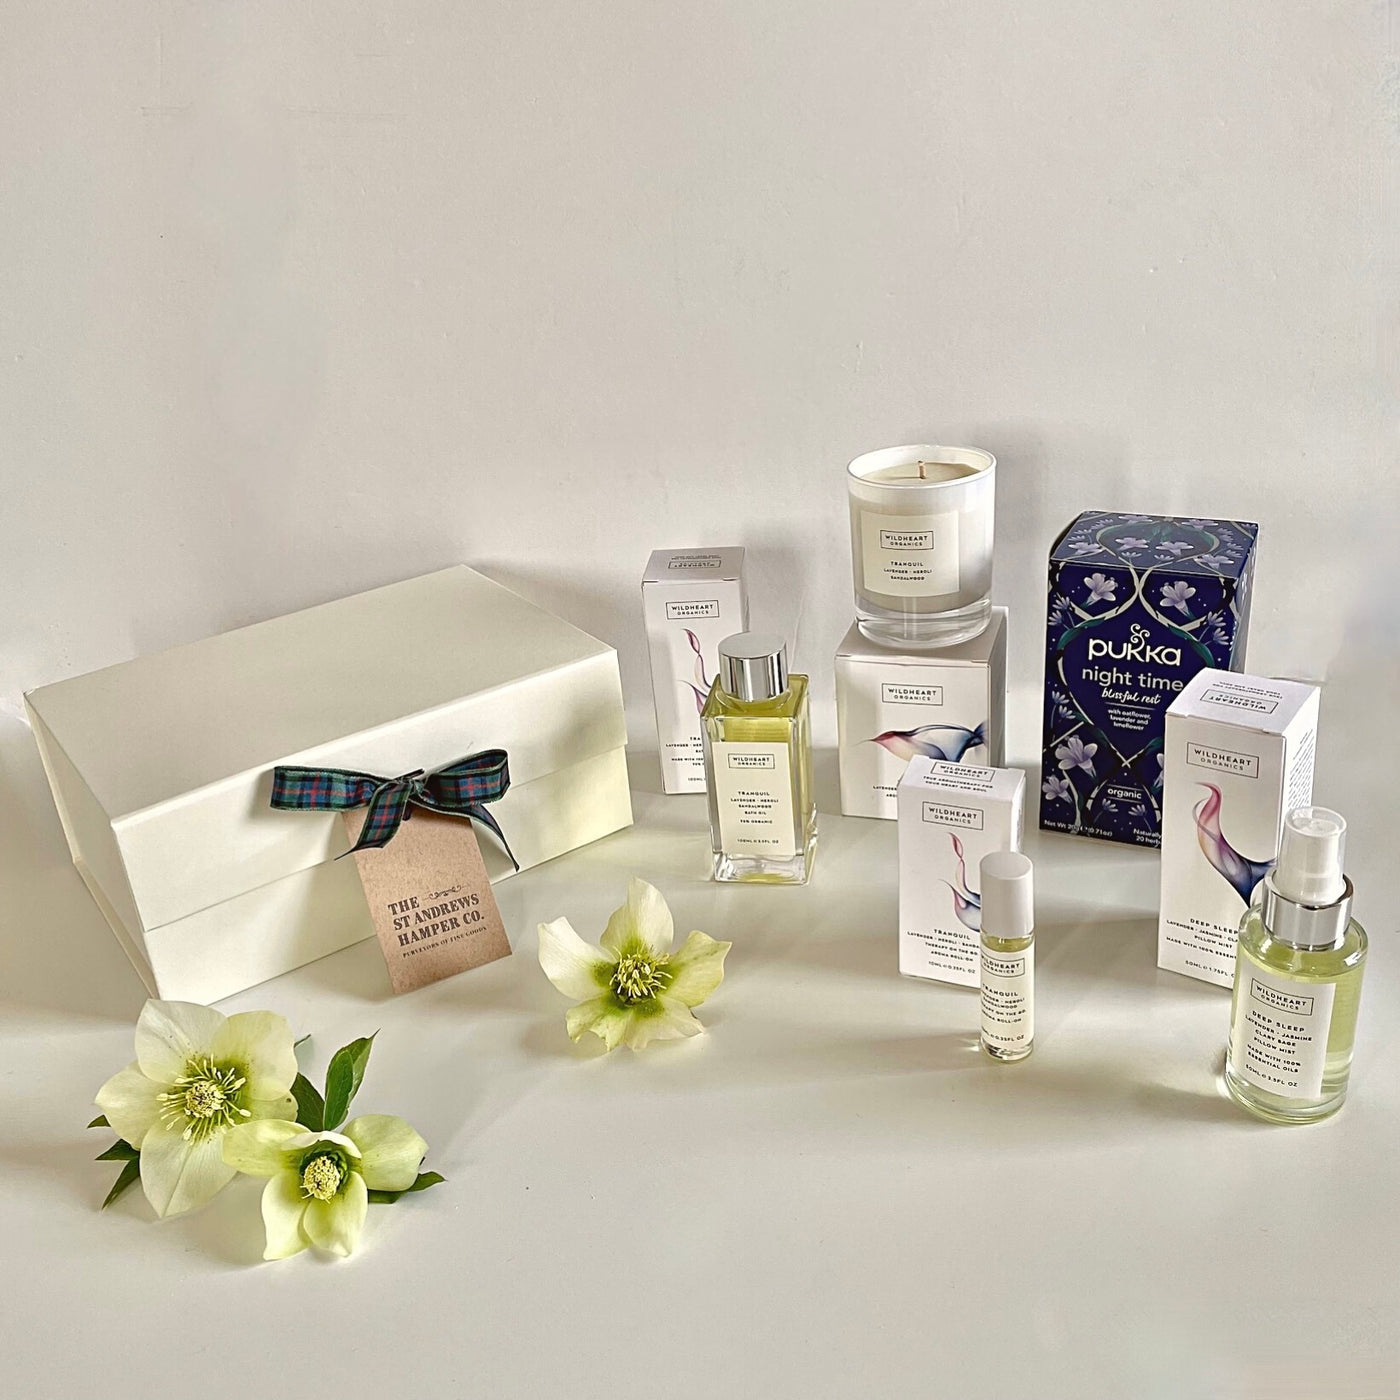 The St Andrews Hamper Company Sweet Dreams Organic Gift Box including bath and body oil, soy wax candle, pillow spray, aroma roll-on and herbal tea bags to aid restful sleep.